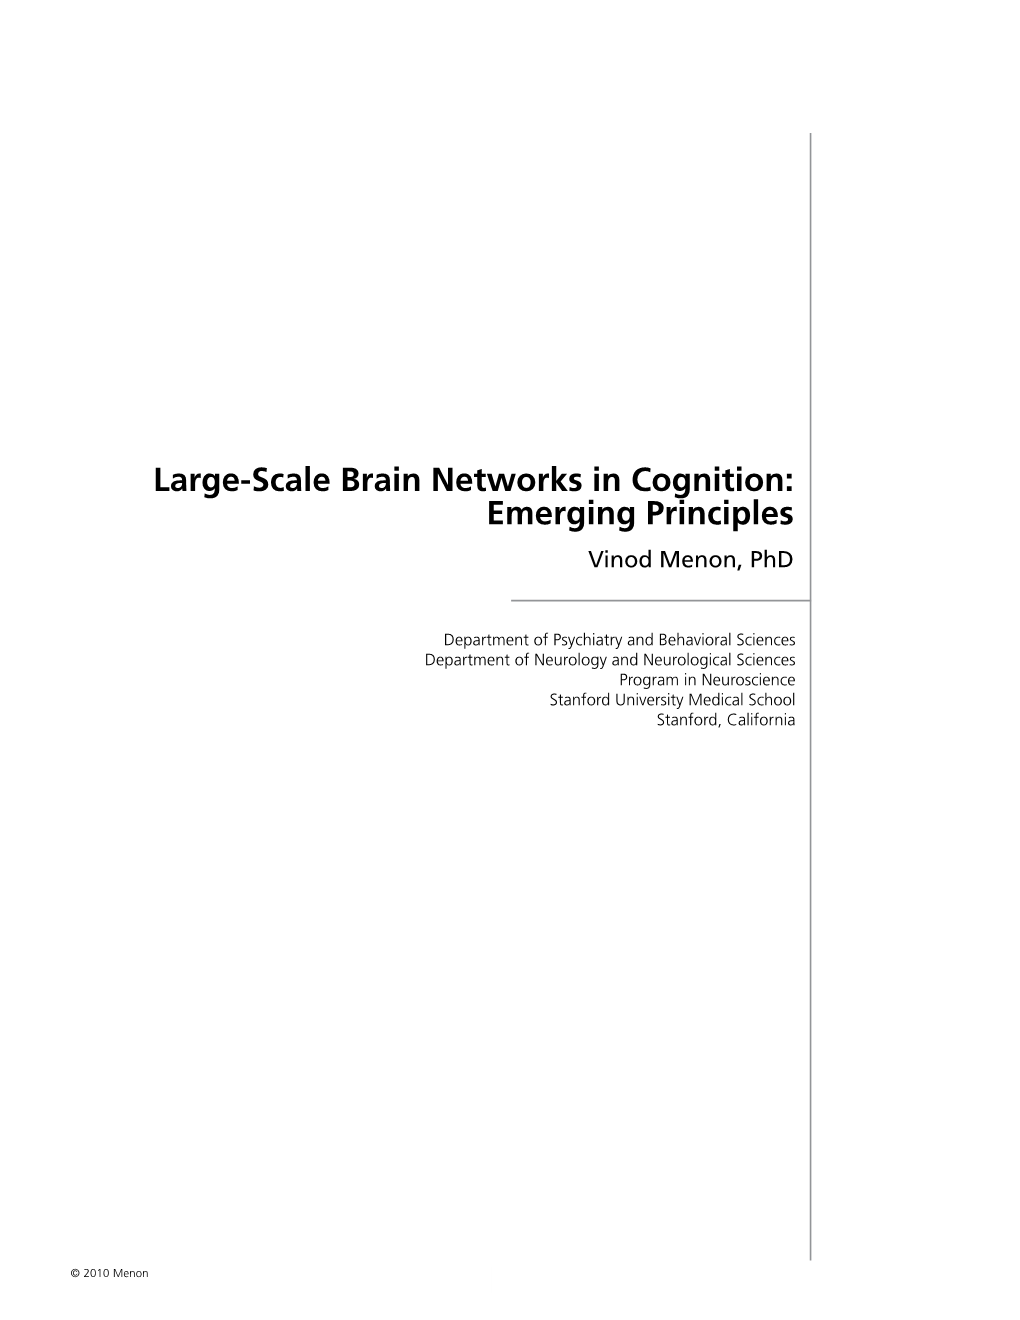 Large-Scale Brain Networks in Cognition: Emerging Principles Vinod Menon, Phd